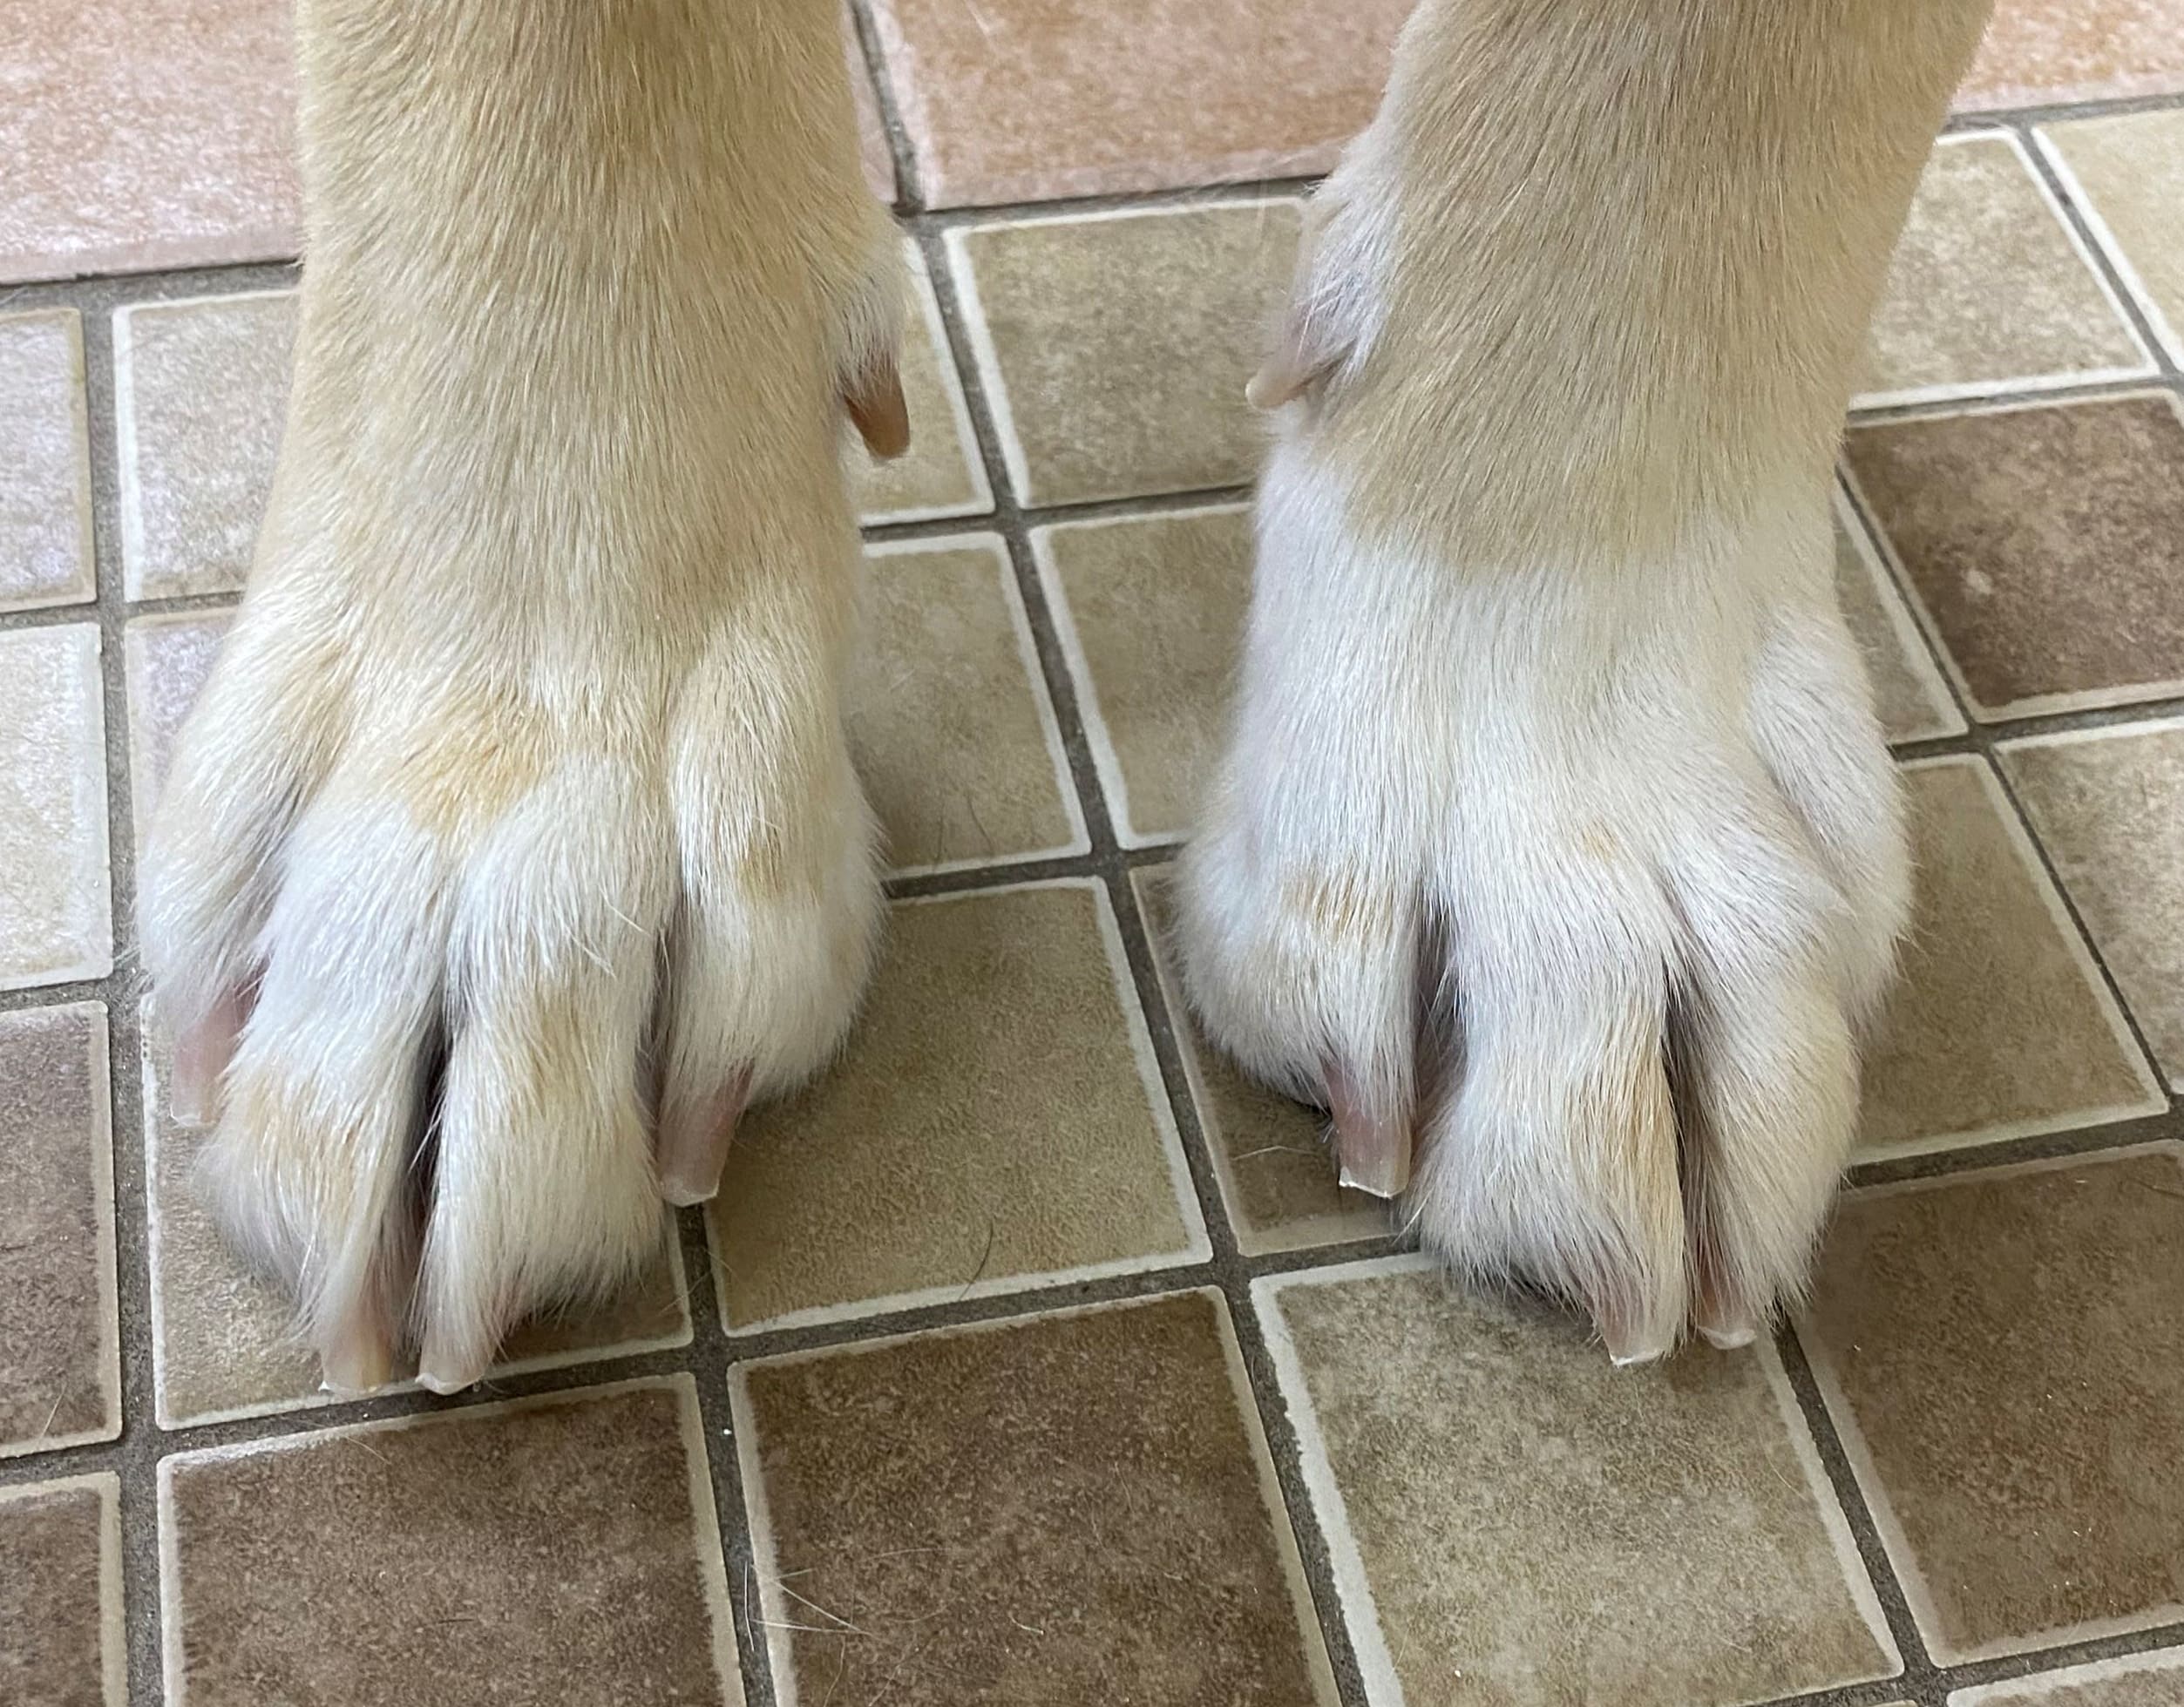 A Force Free Way to Trim Your Dog's Toe Nails: Dog Gone Problems